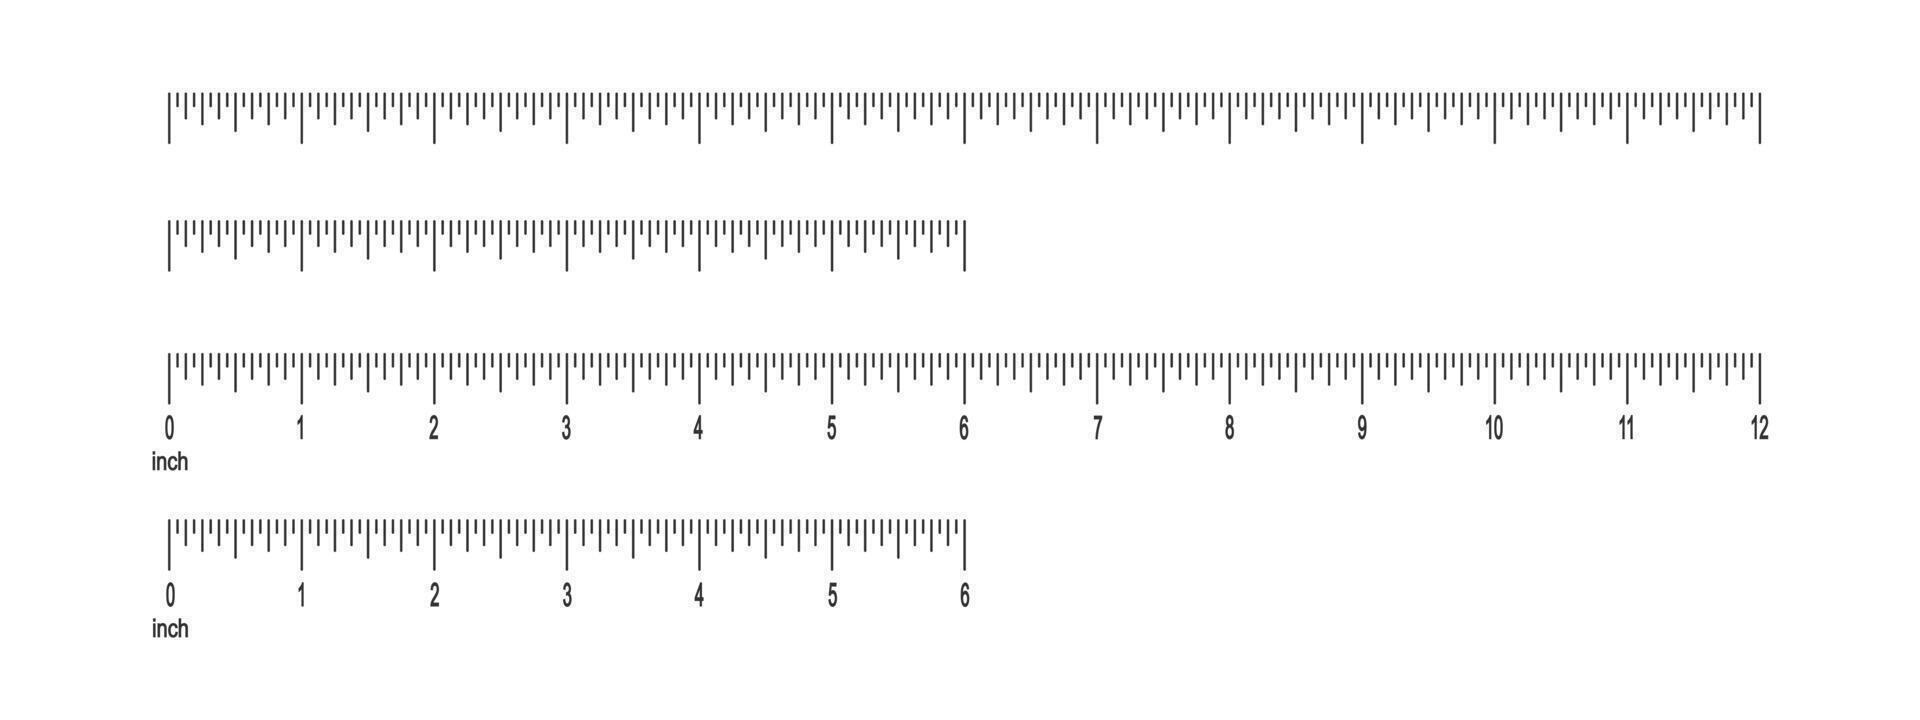 6 and 12 inch ruler scale with and without numbers. 1 foot measuring chart with markup. Distance, height or length measurement math or sewing tool vector